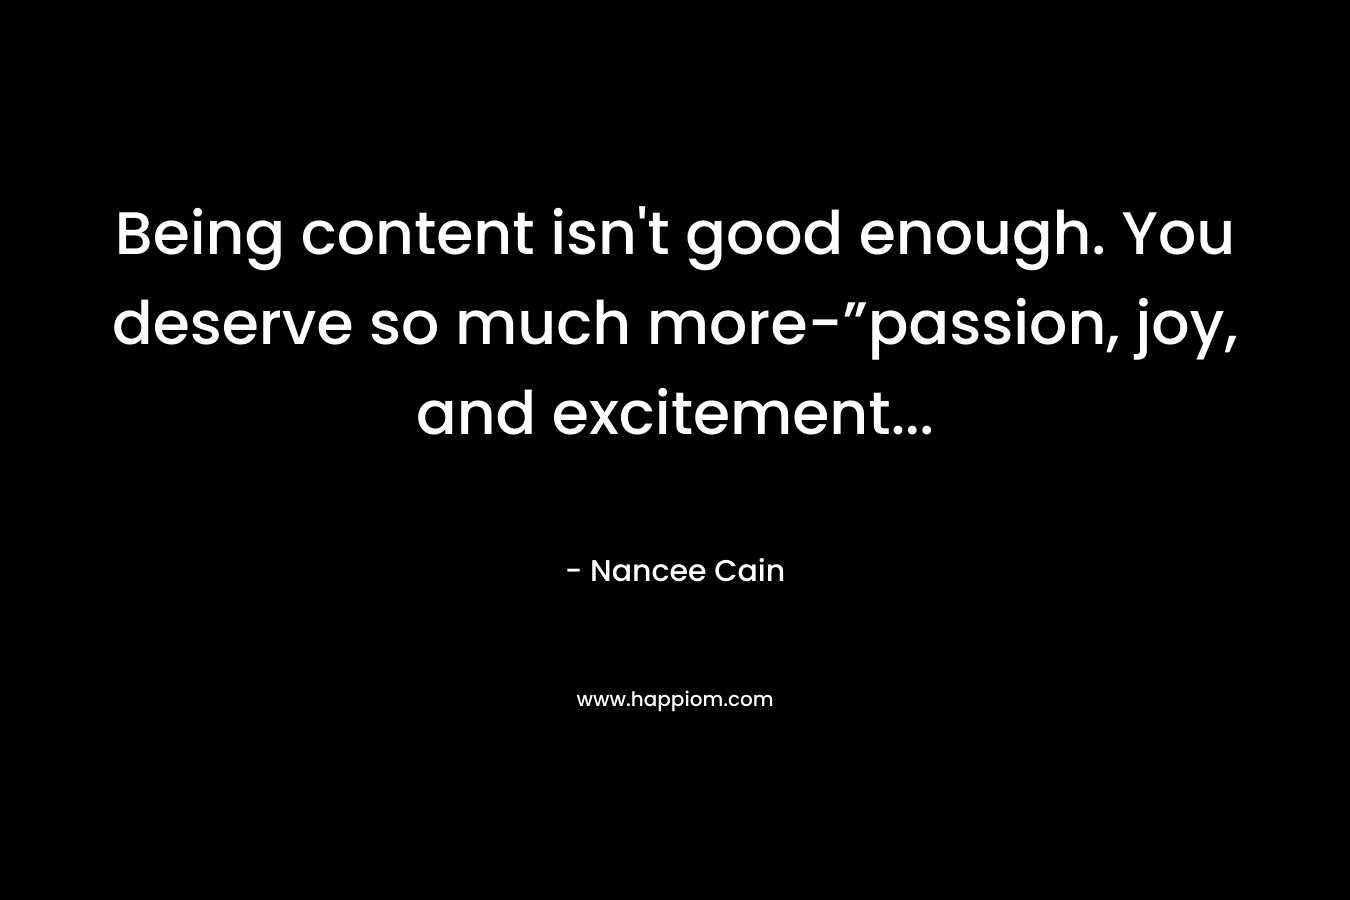 Being content isn't good enough. You deserve so much more-”passion, joy, and excitement...